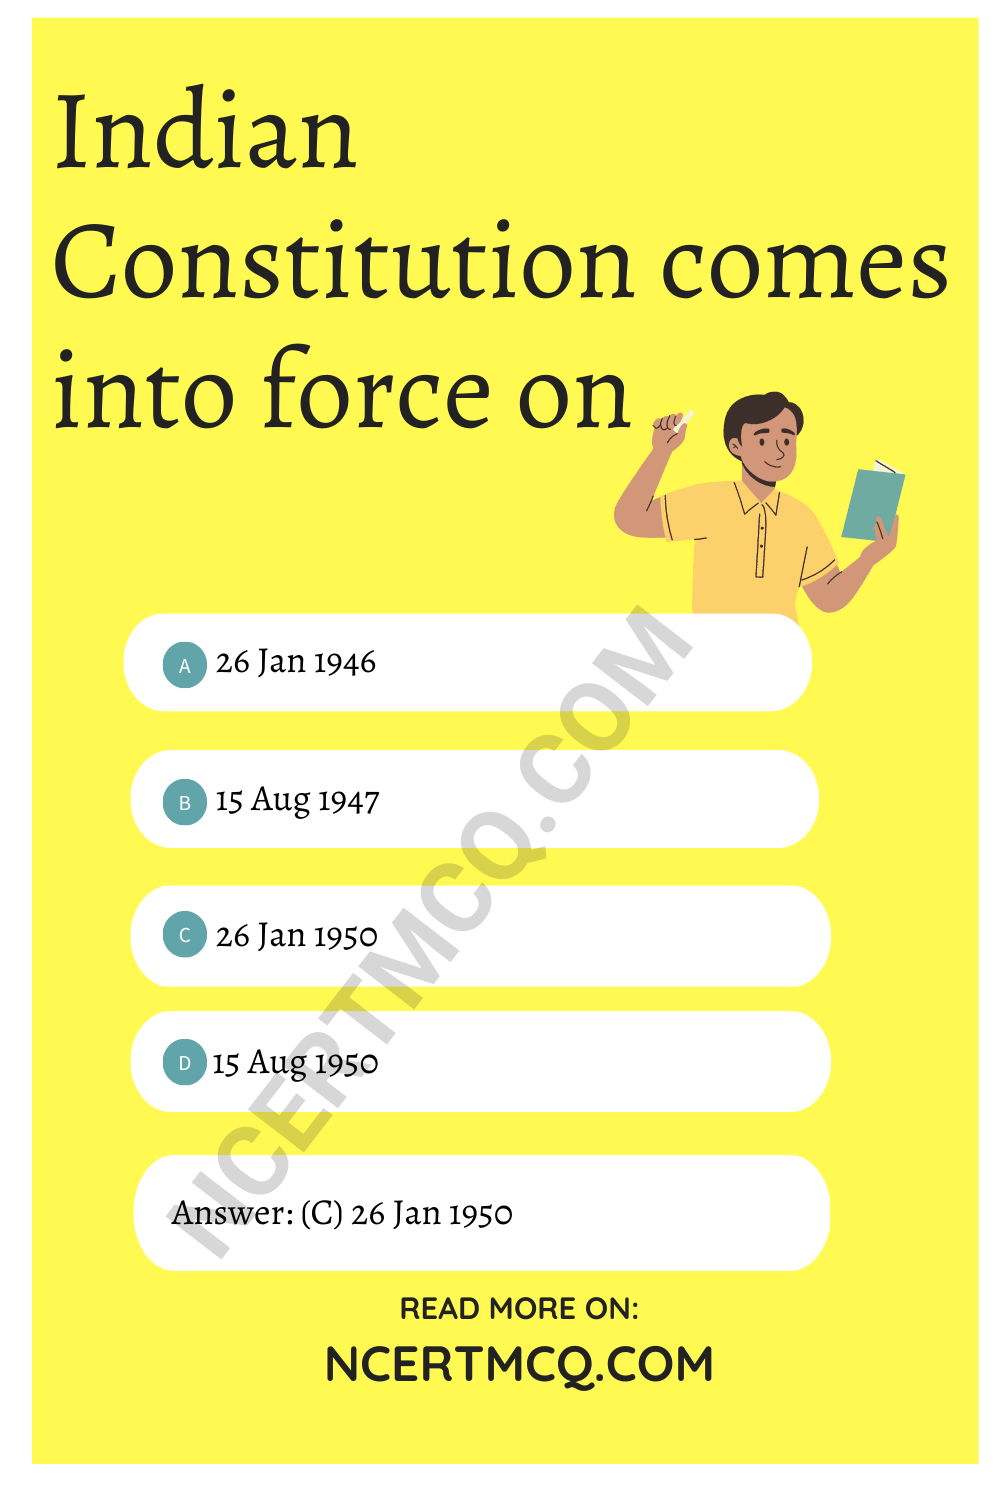 Indian Constitution comes into force on